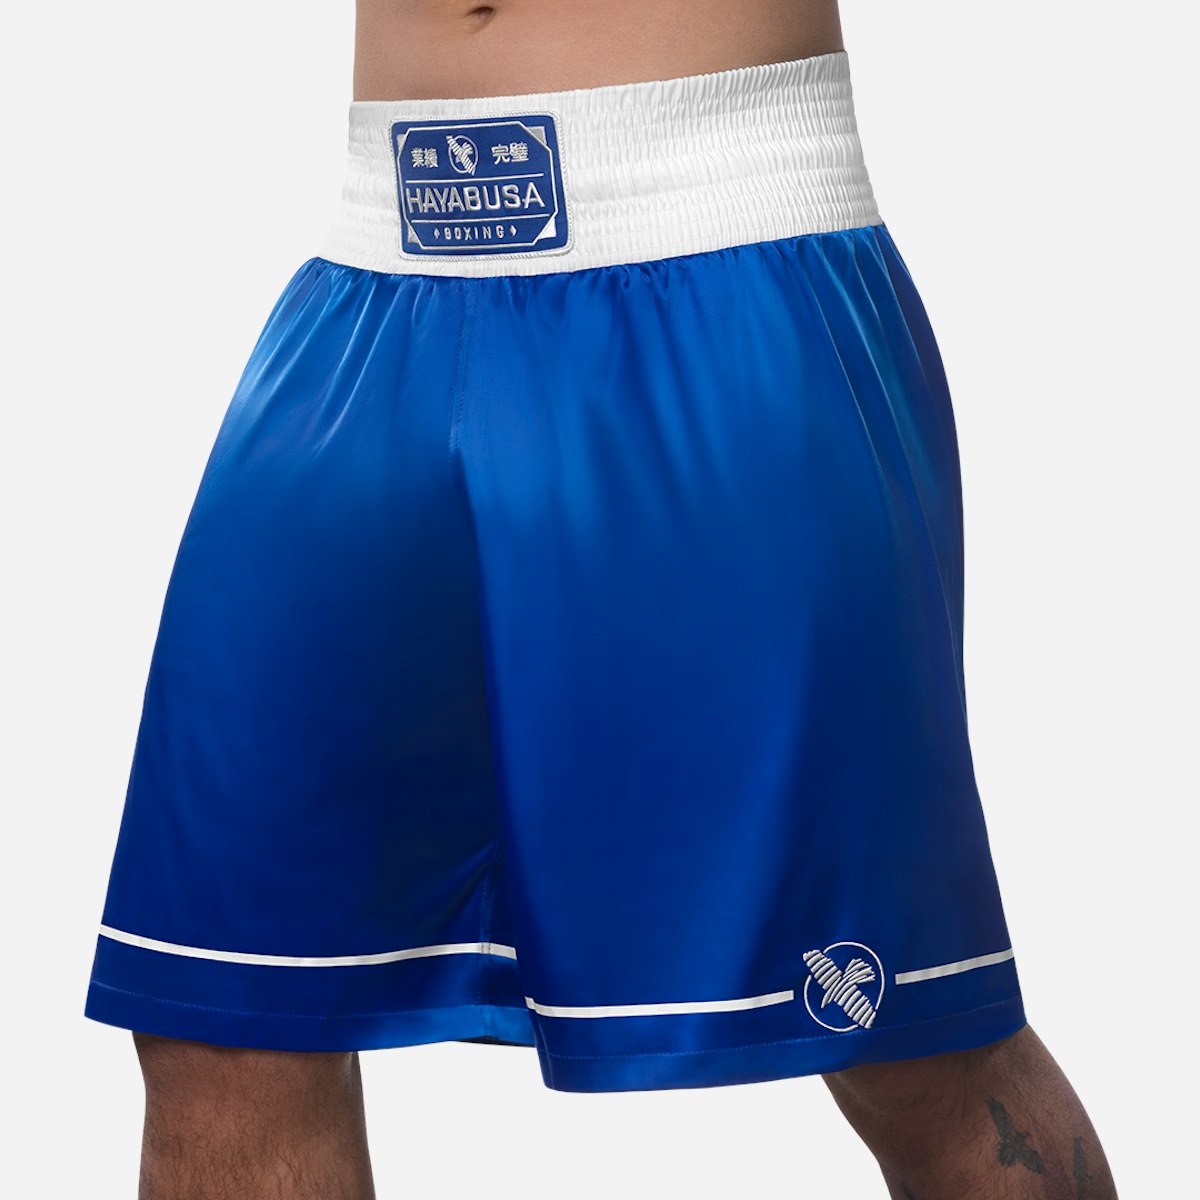 Mink Flow on X: Shop for you favorite classic NBA team shorts or